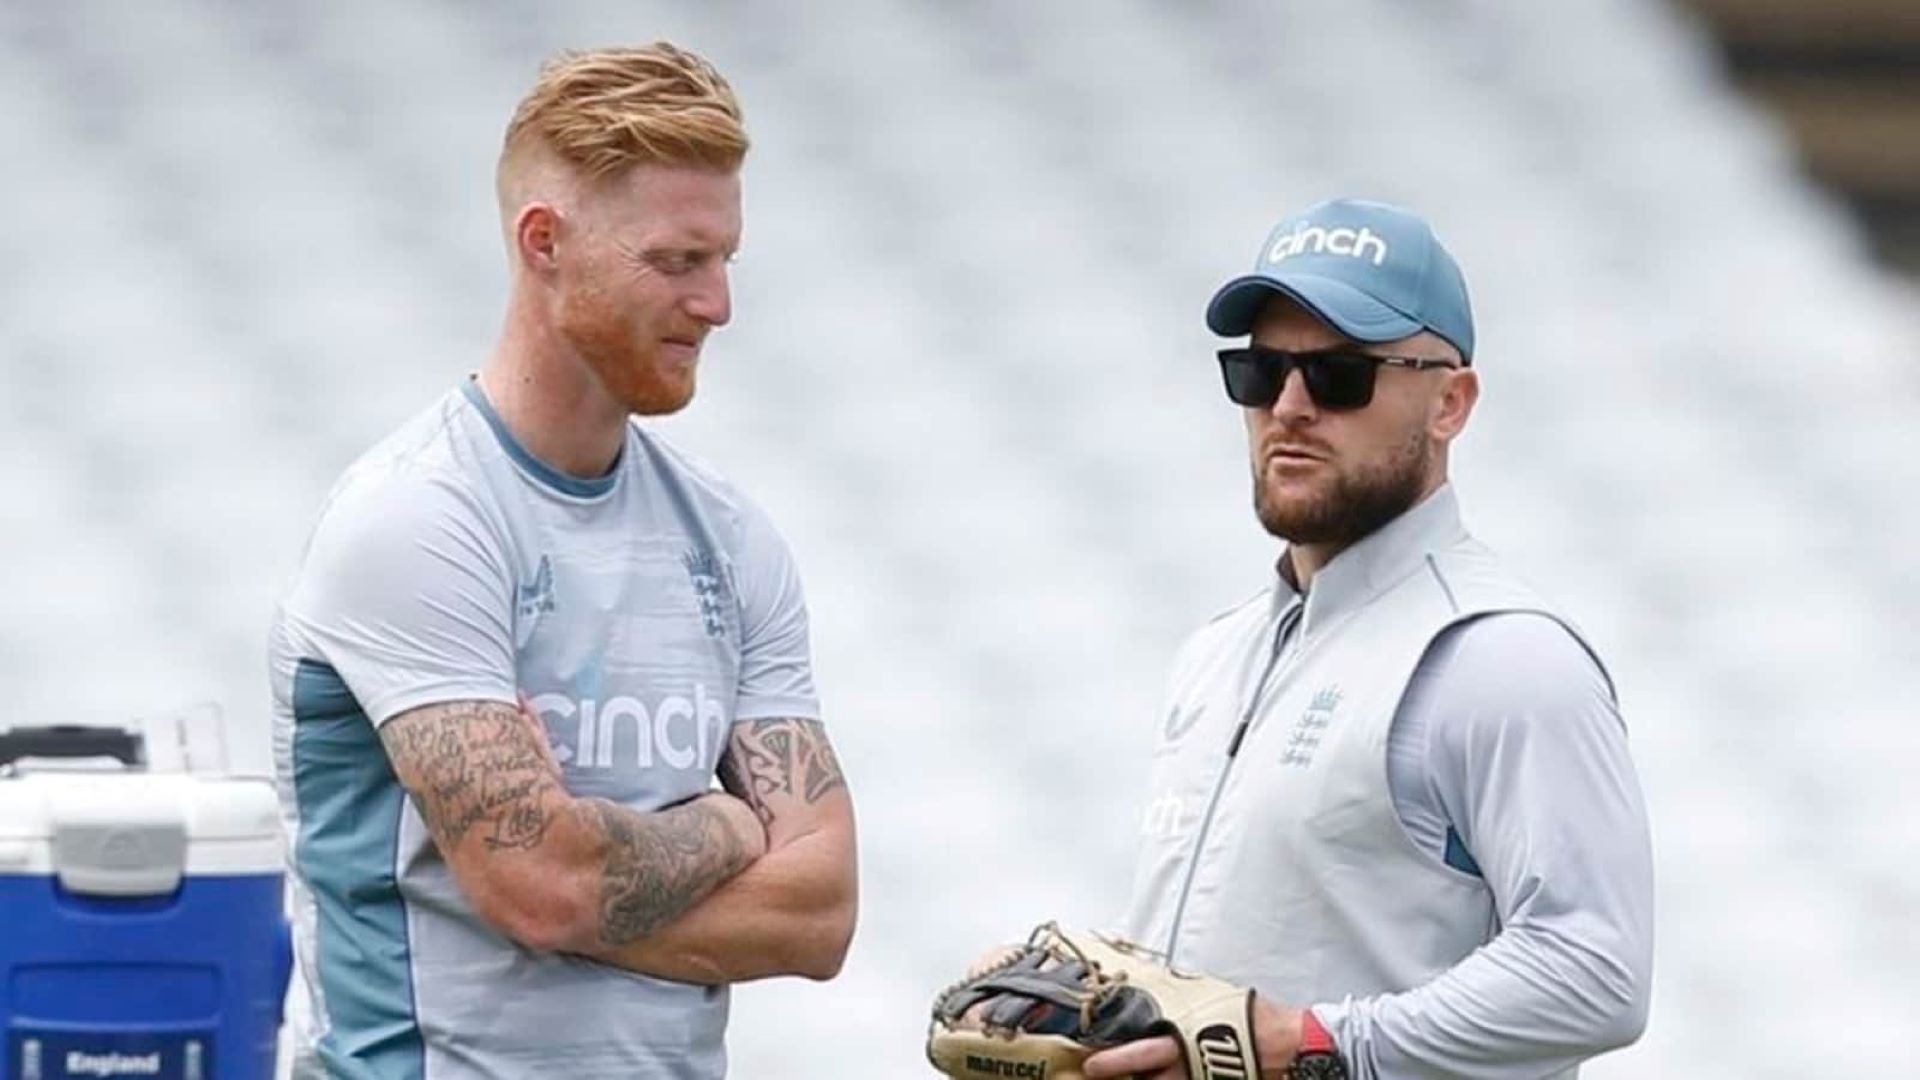 England have been dominant under the McCullum-Stokes combination in Tests.